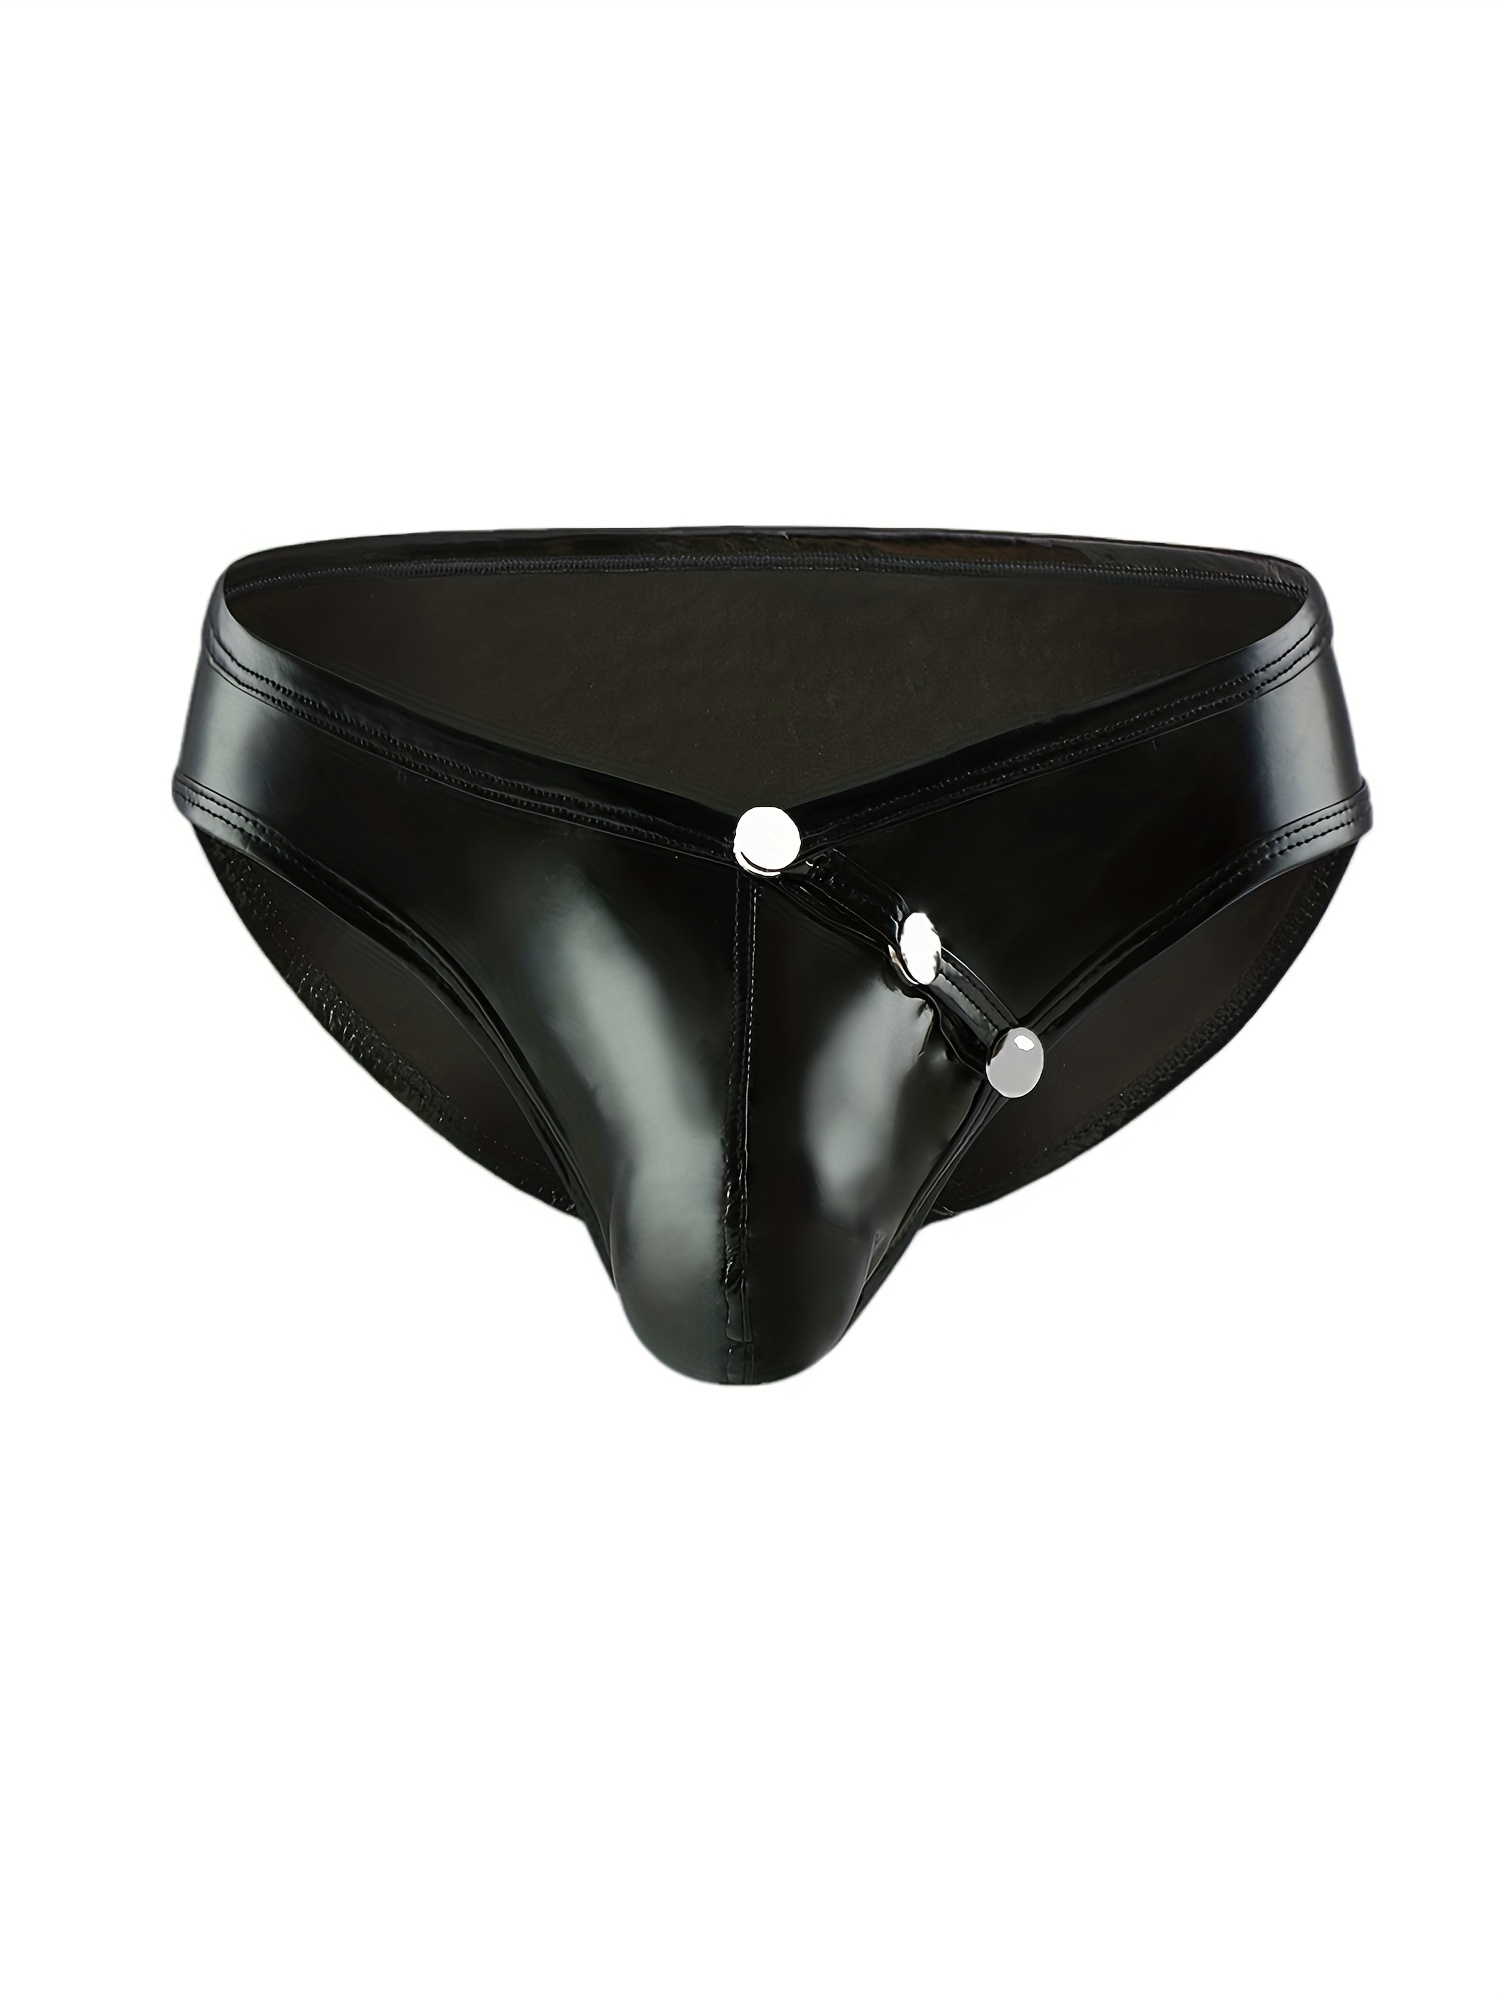 Mens Glossy Patent Leather Boxer Mens Leather Briefs With Bulge